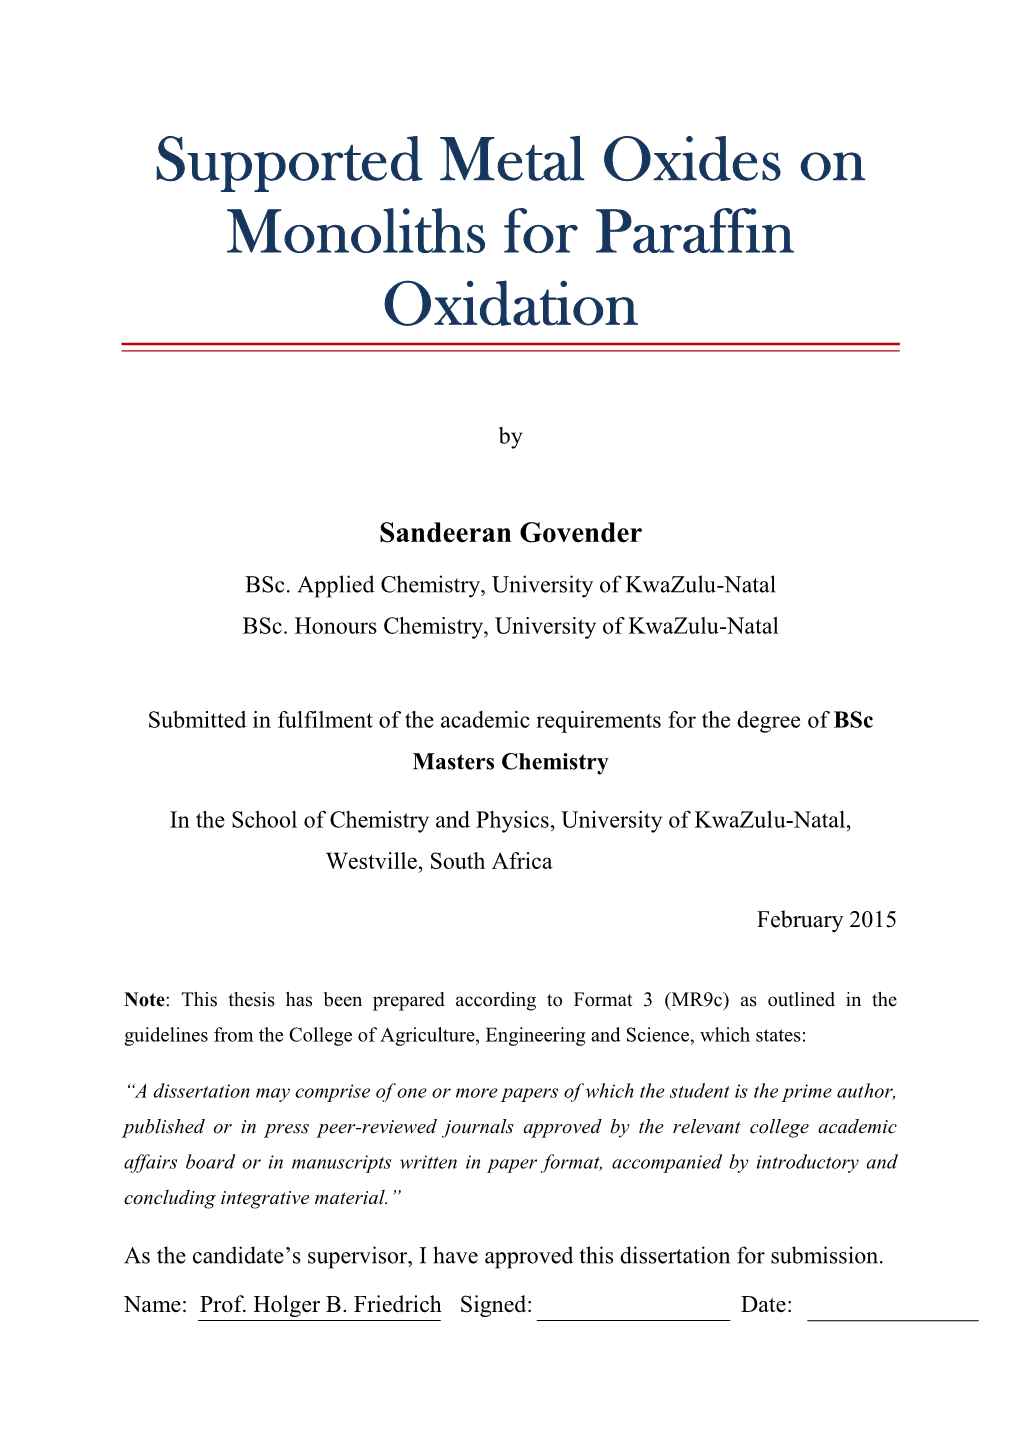 Supported Metal Oxides on Monoliths for Paraffin Oxidation